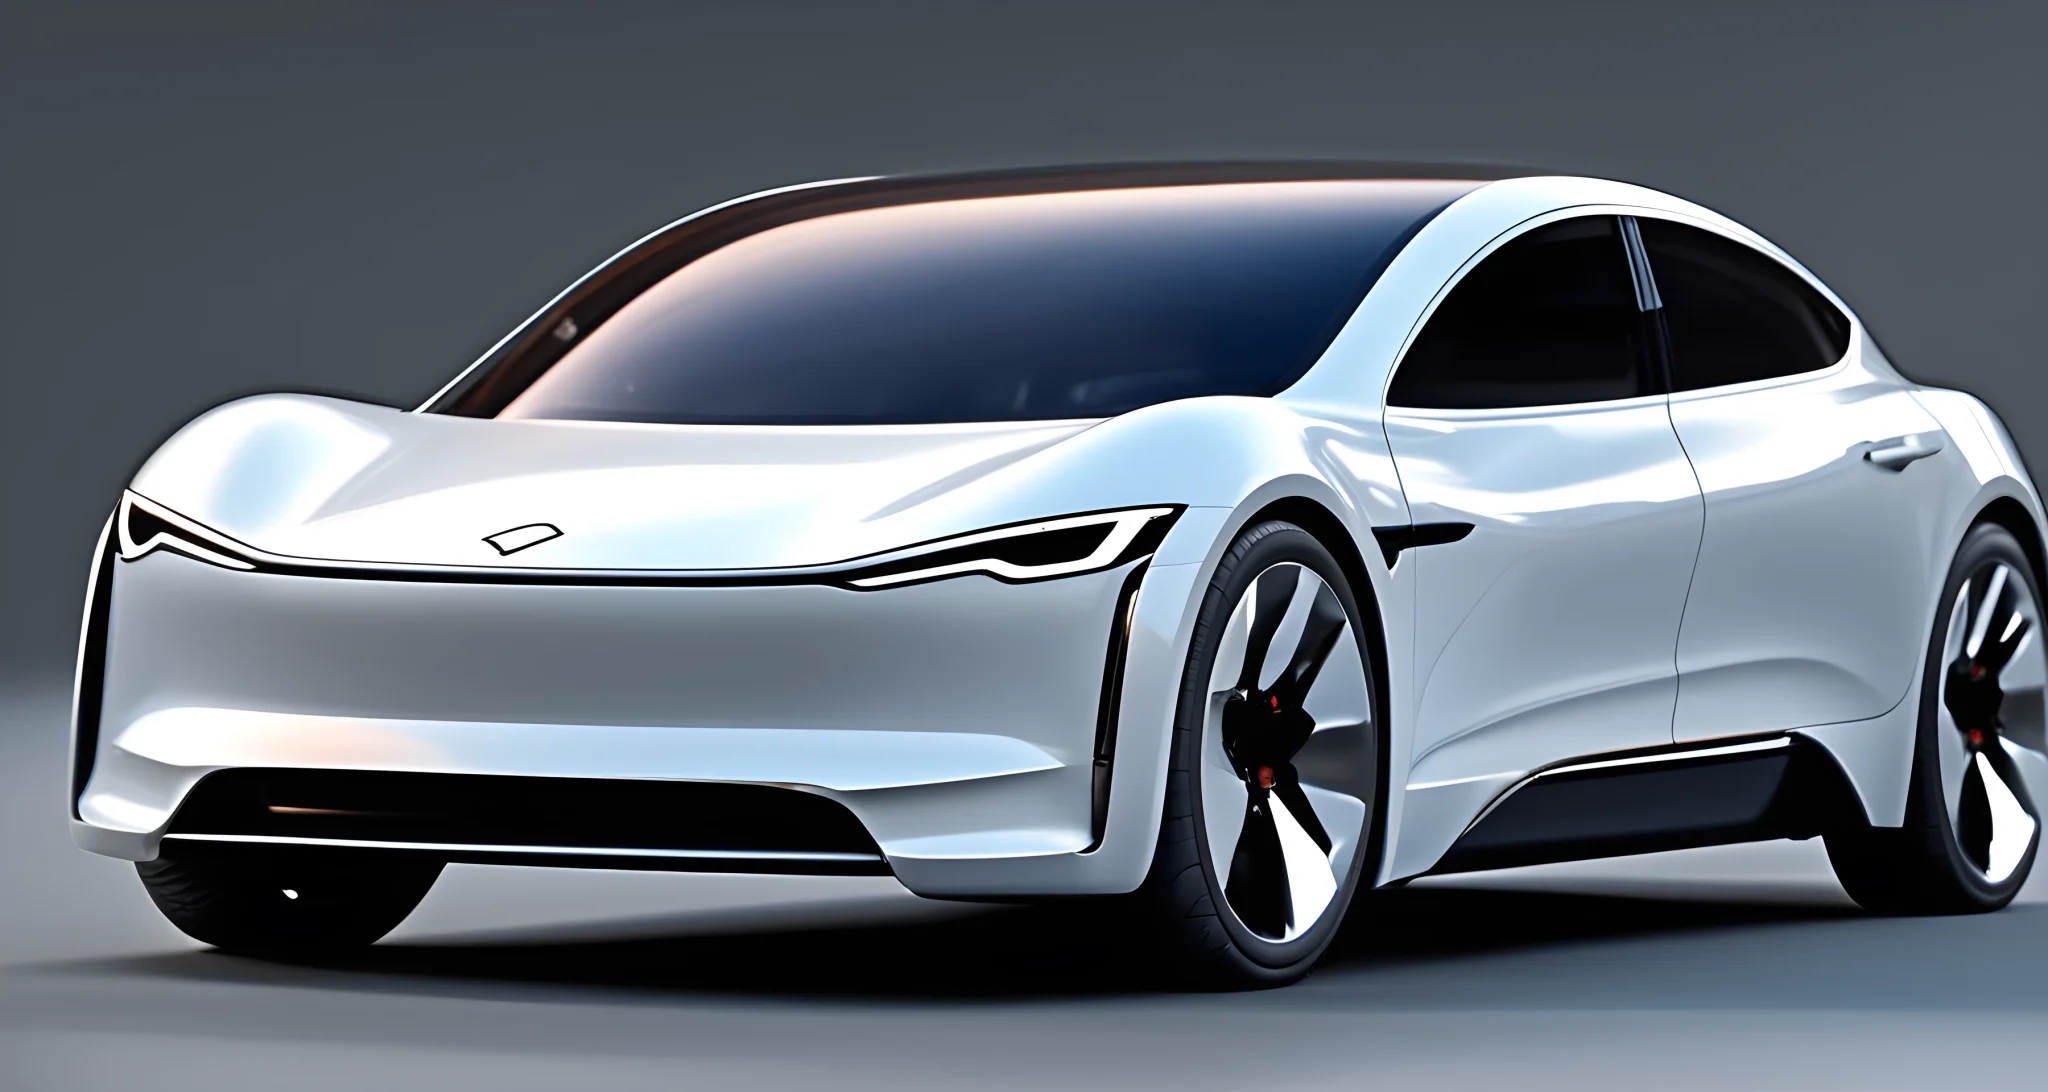 The image shows a modern electric vehicle with a sleek design and a high-capacity battery.